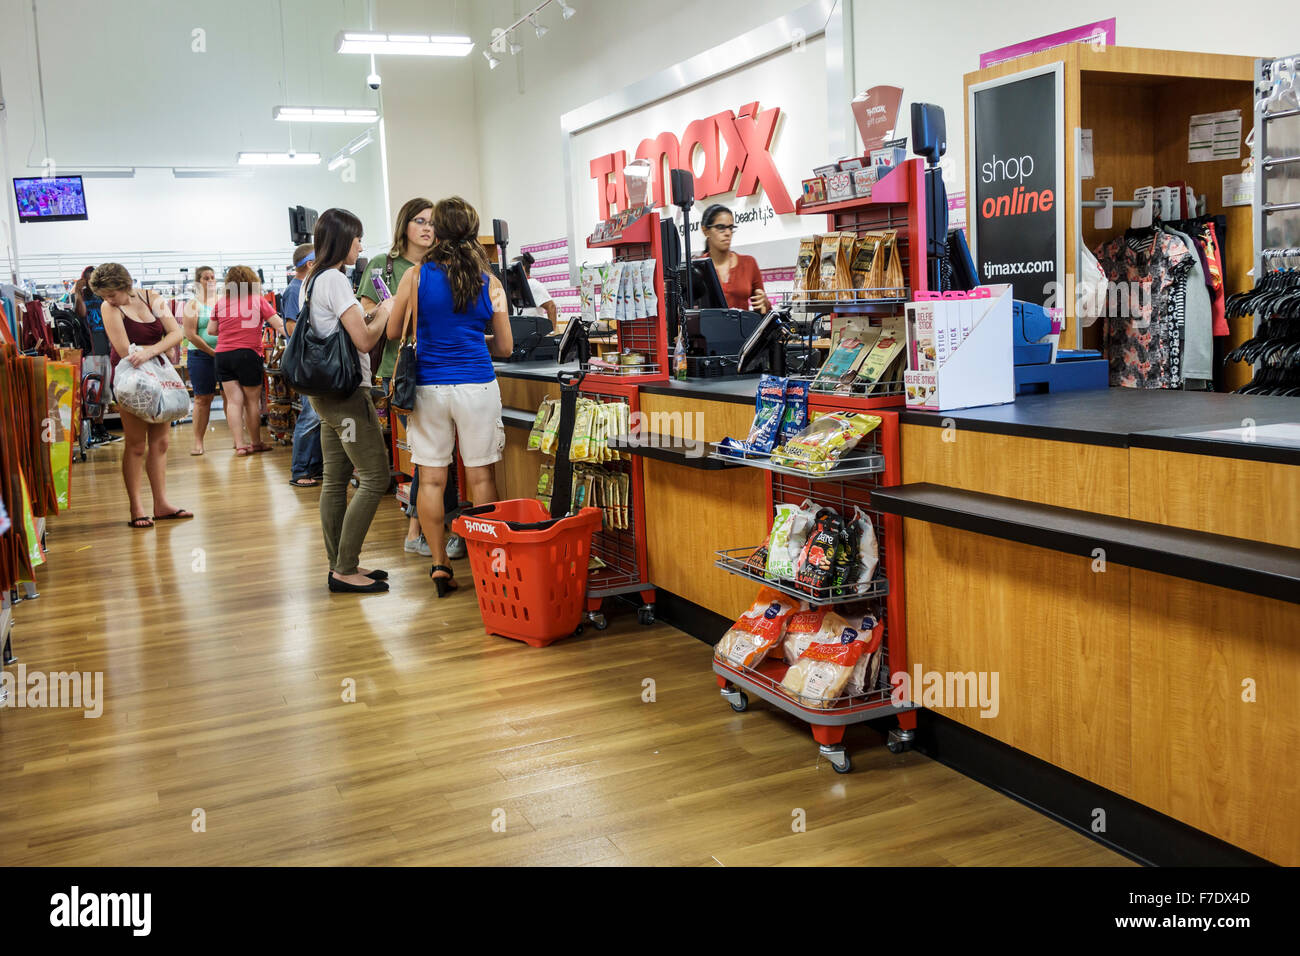 T j maxx hi-res stock photography and images - Alamy